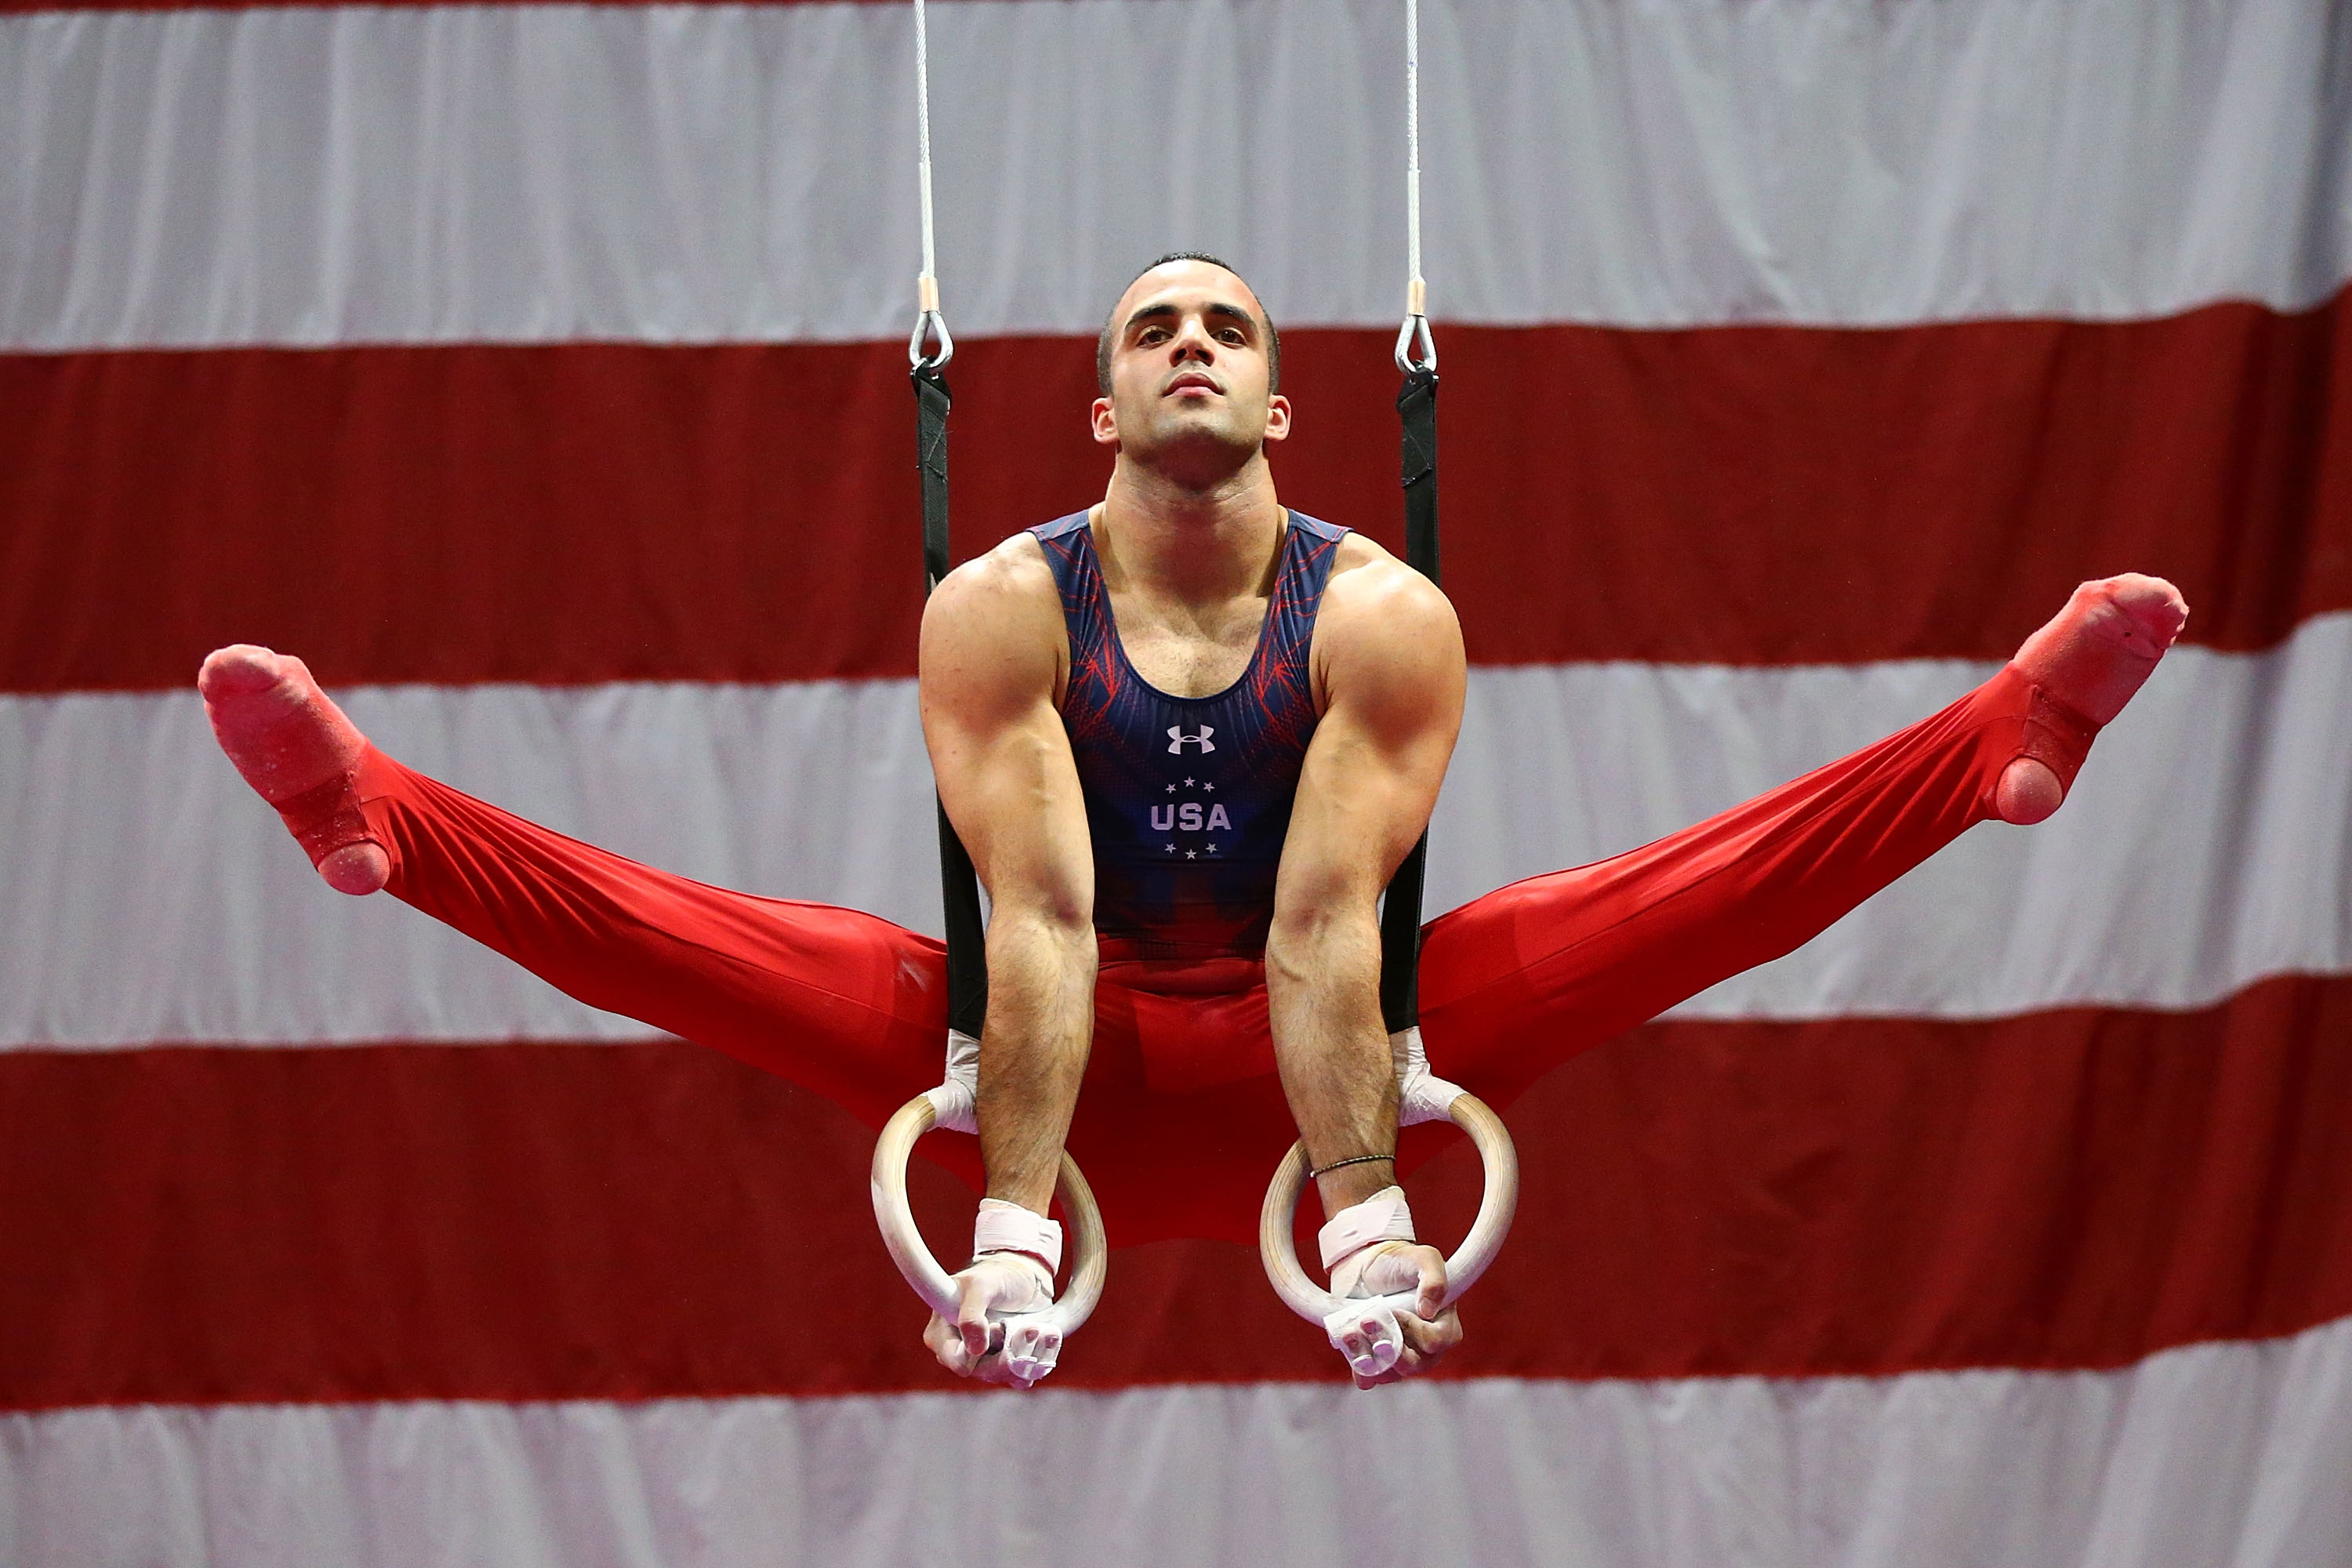 ST. LOUIS, MO - JUNE 23: Danell Leyva competes on the rings during day one of the 2016 Men's Gymnastics Olympic Trials at Chafitz Arena on June 23, 2016 in St. Louis, Missouri. (Photo by Dilip Vishwanat/Getty Images)